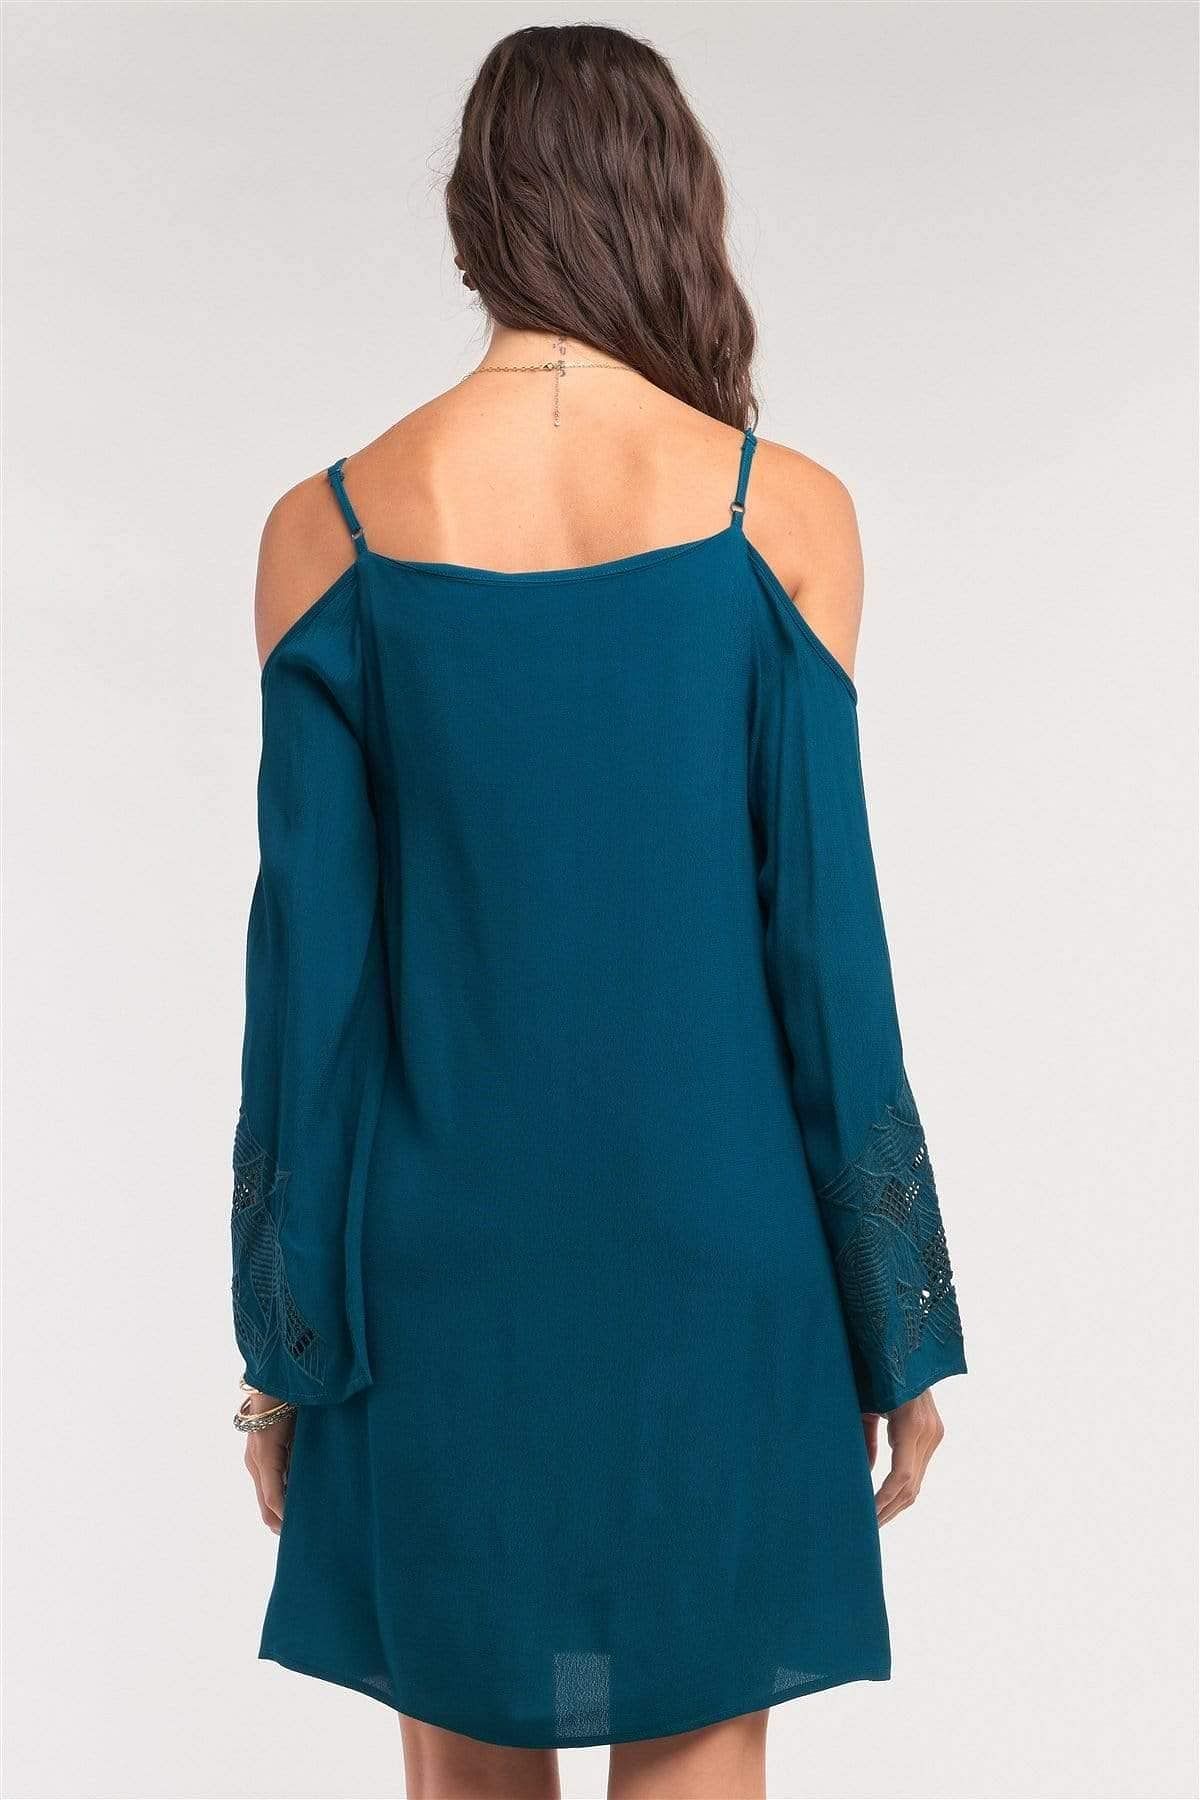 Teal Long Sleeve Off-the-shoulder Mini Dress - Shopping Therapy Dress